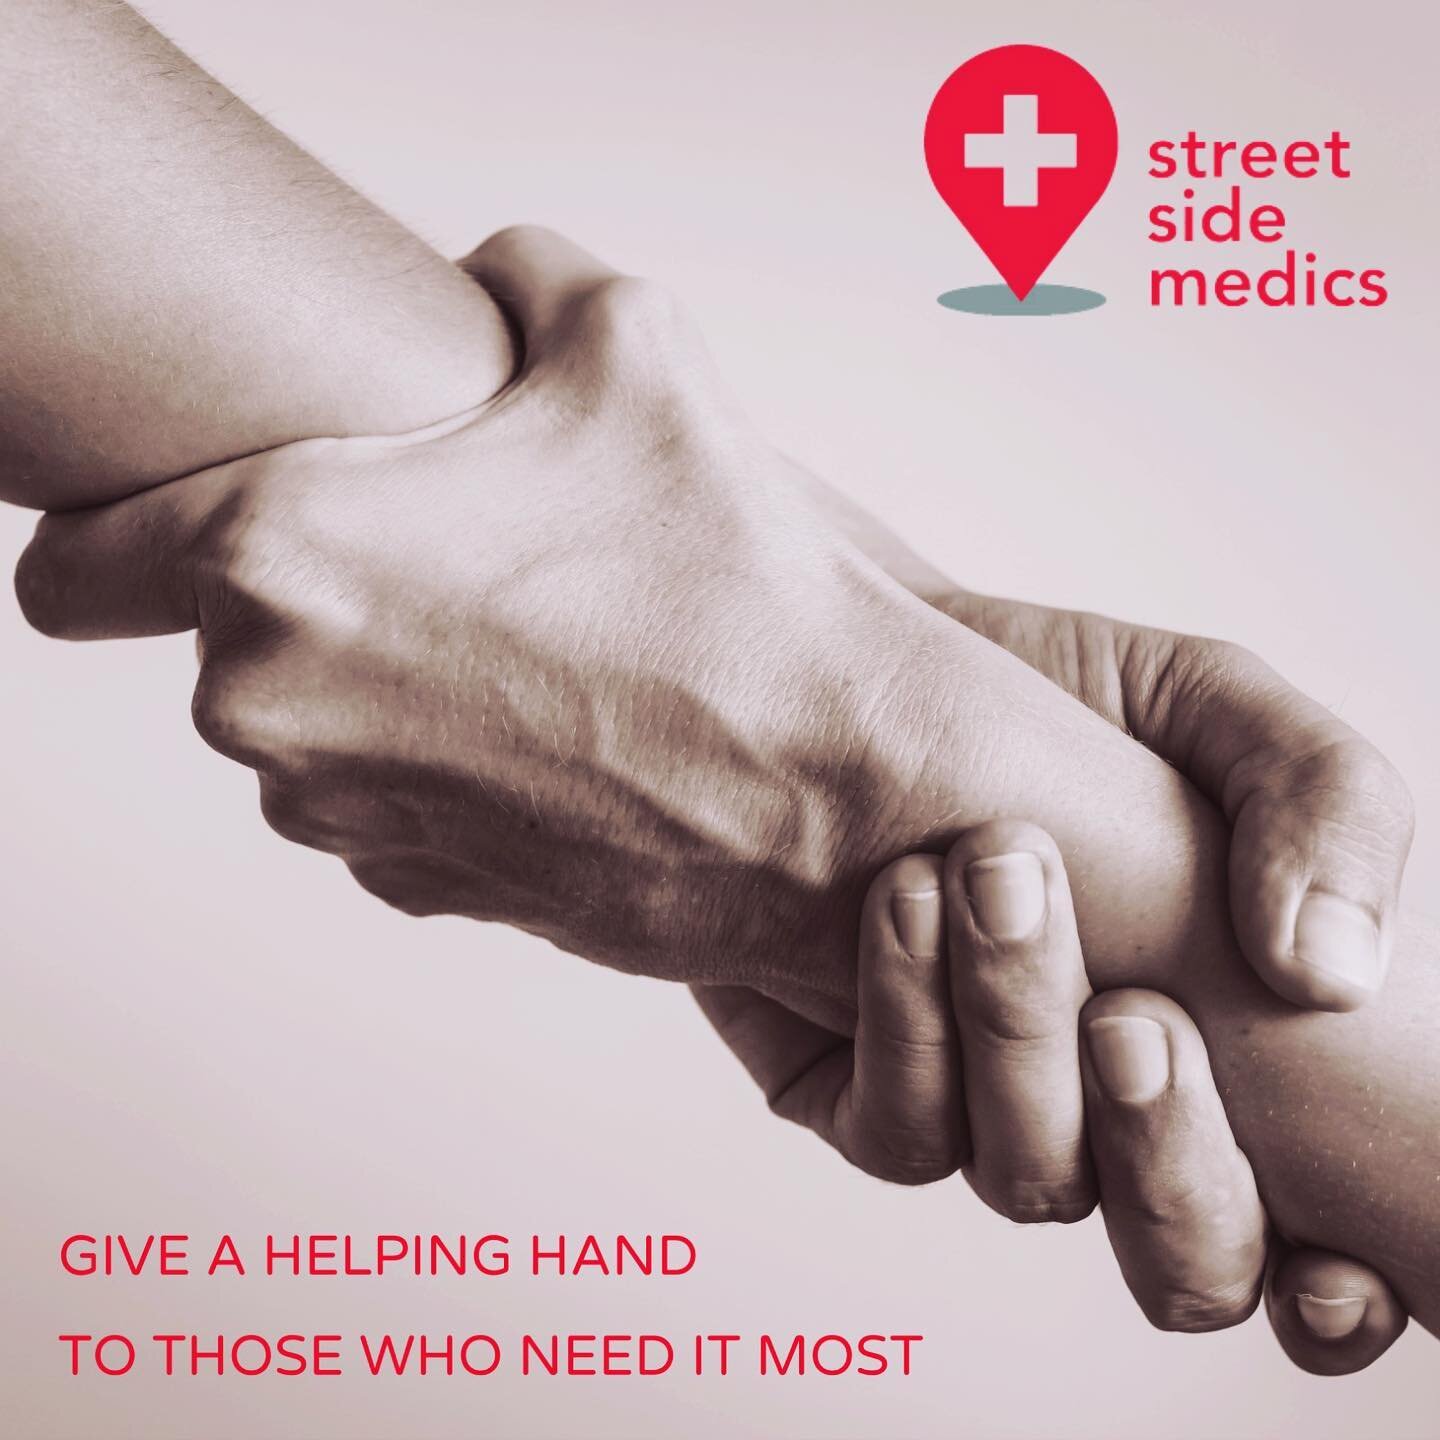 At Street Side Medics, we strongly believe that everyone should have equal access to primary healthcare. Our services are of no personal charge to any patients regardless of their healthcare status or background. We rely on your donations to continue